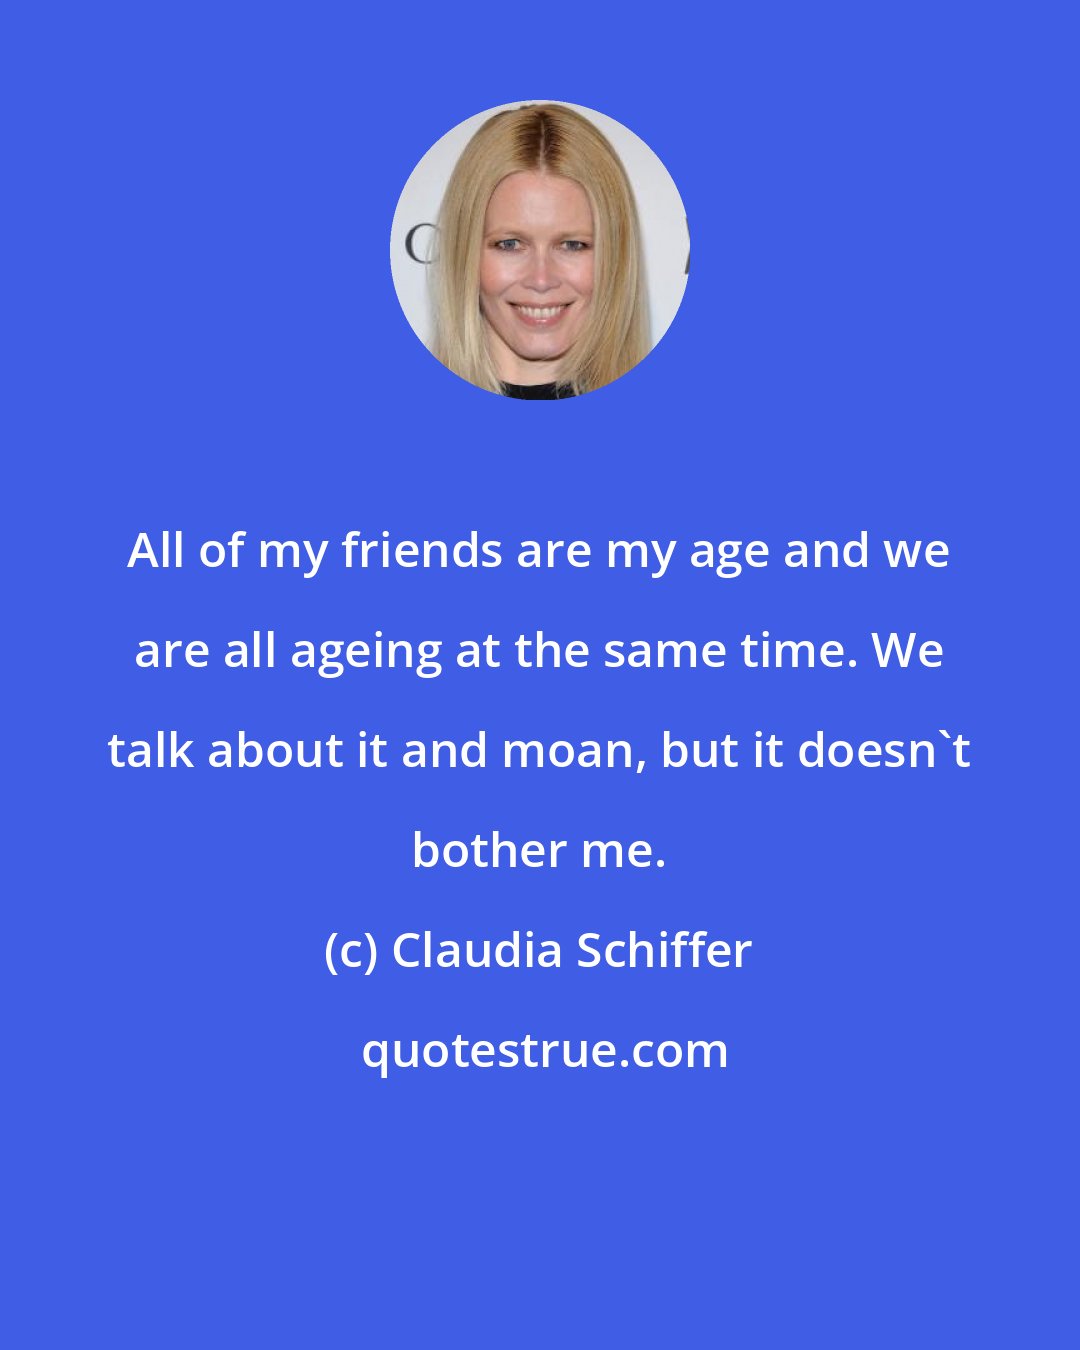 Claudia Schiffer: All of my friends are my age and we are all ageing at the same time. We talk about it and moan, but it doesn't bother me.